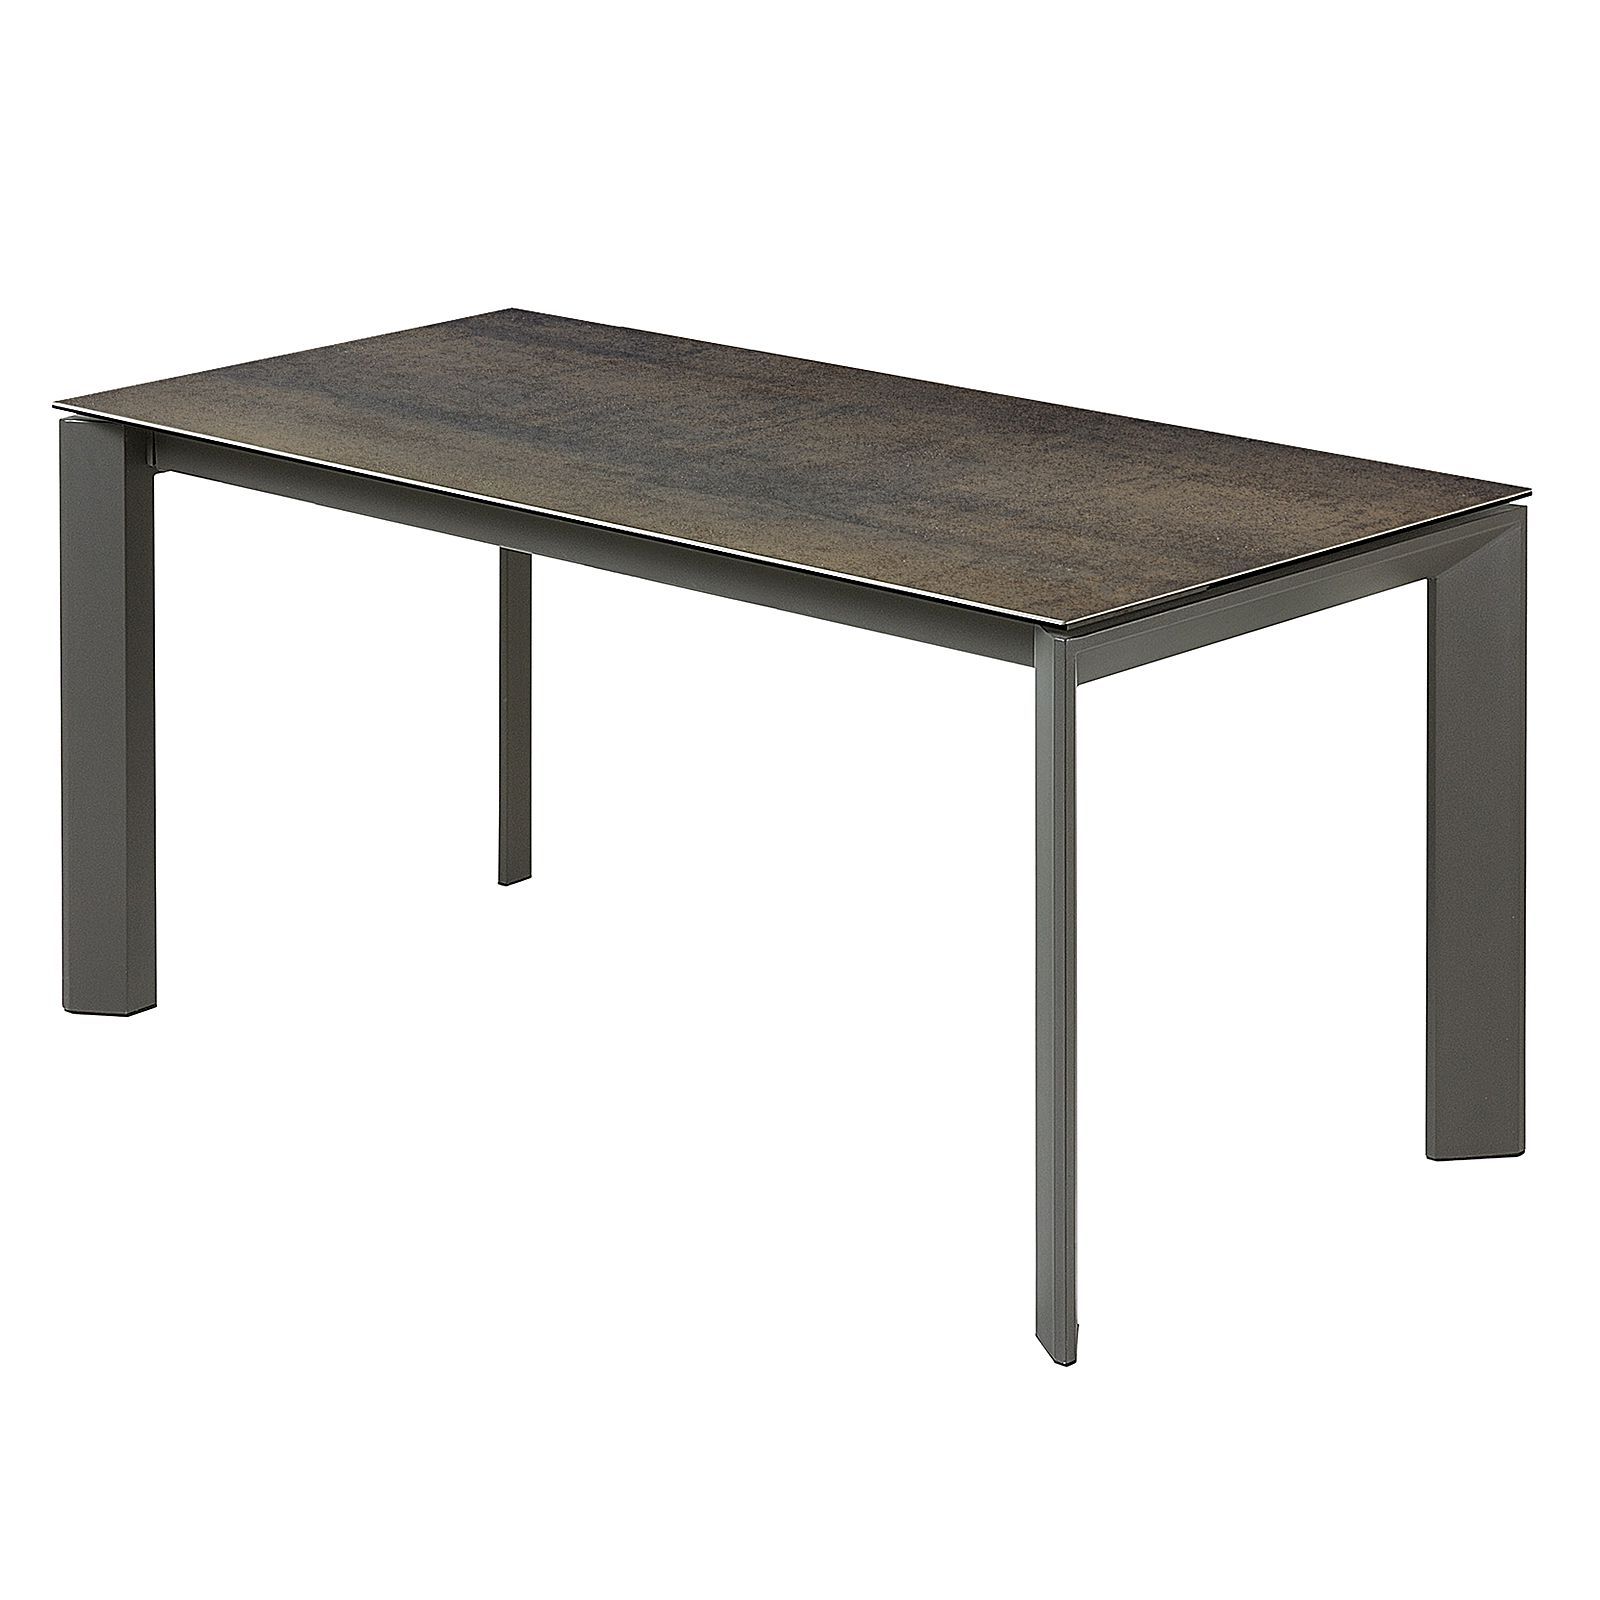 2017 Abell Extending Dining Table, Iron Moss/black Steelvida & Co For Black Extending Dining Tables (View 17 of 25)